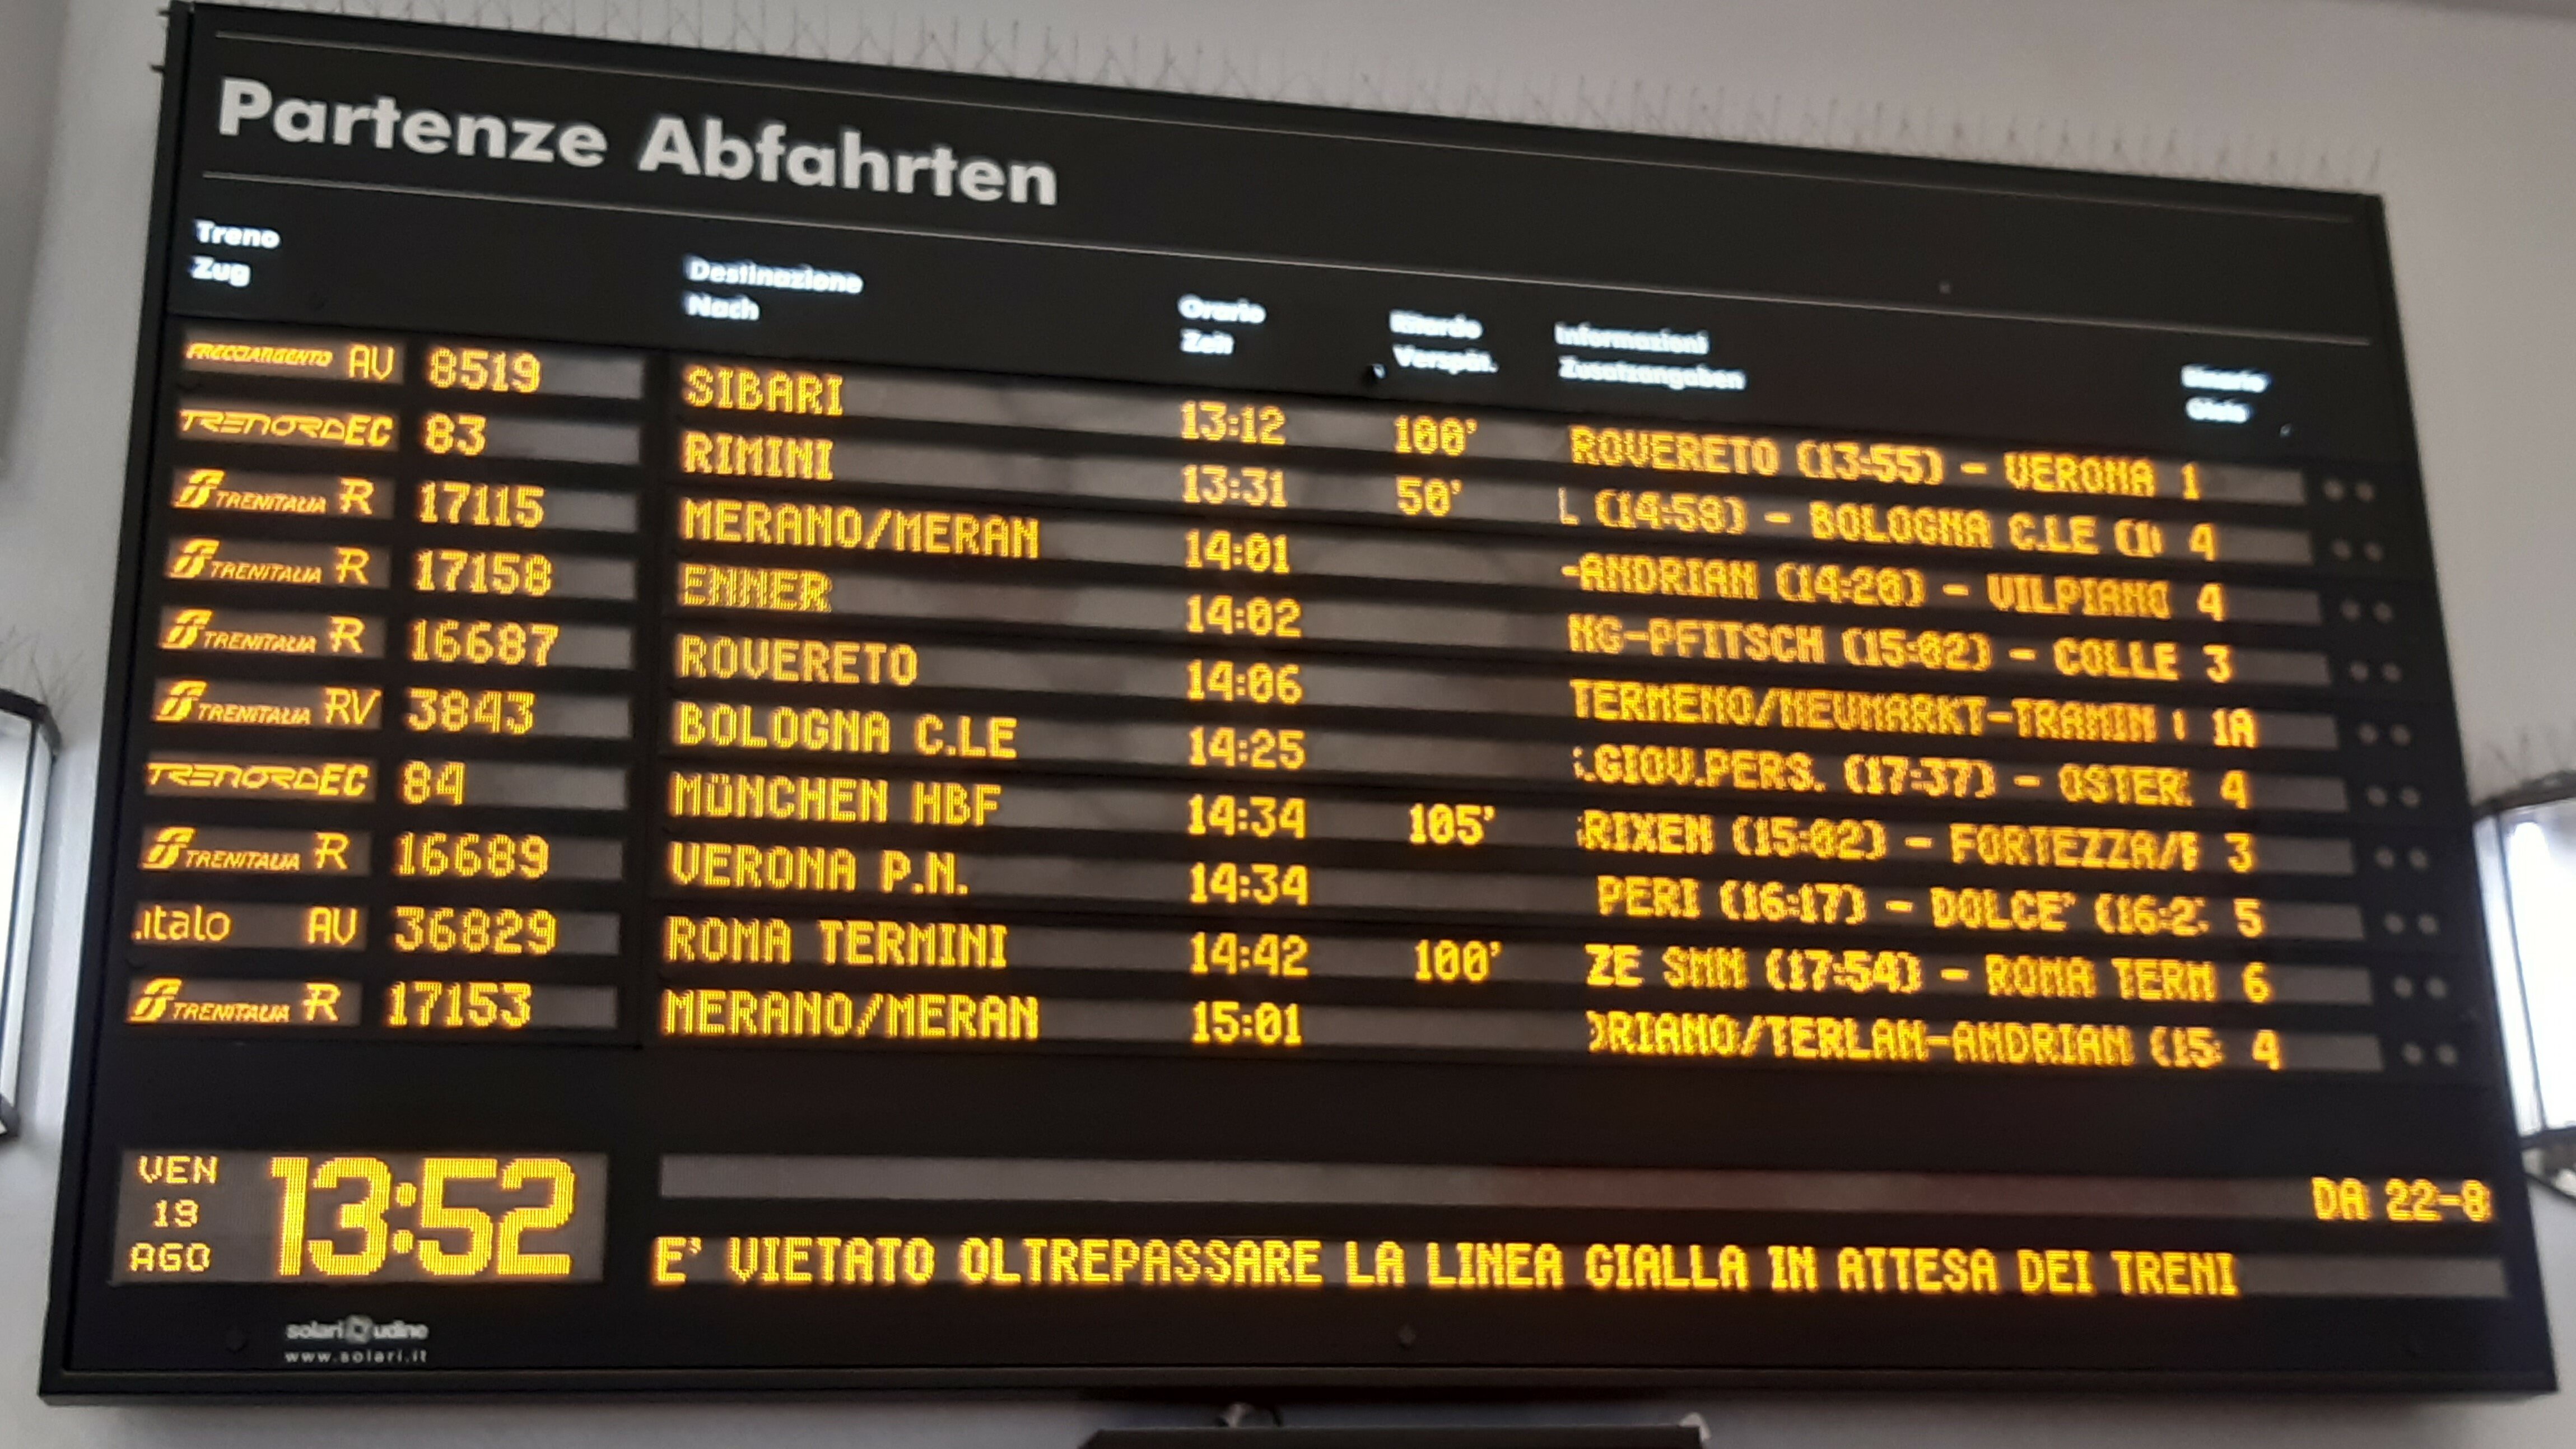 The display board with departure times